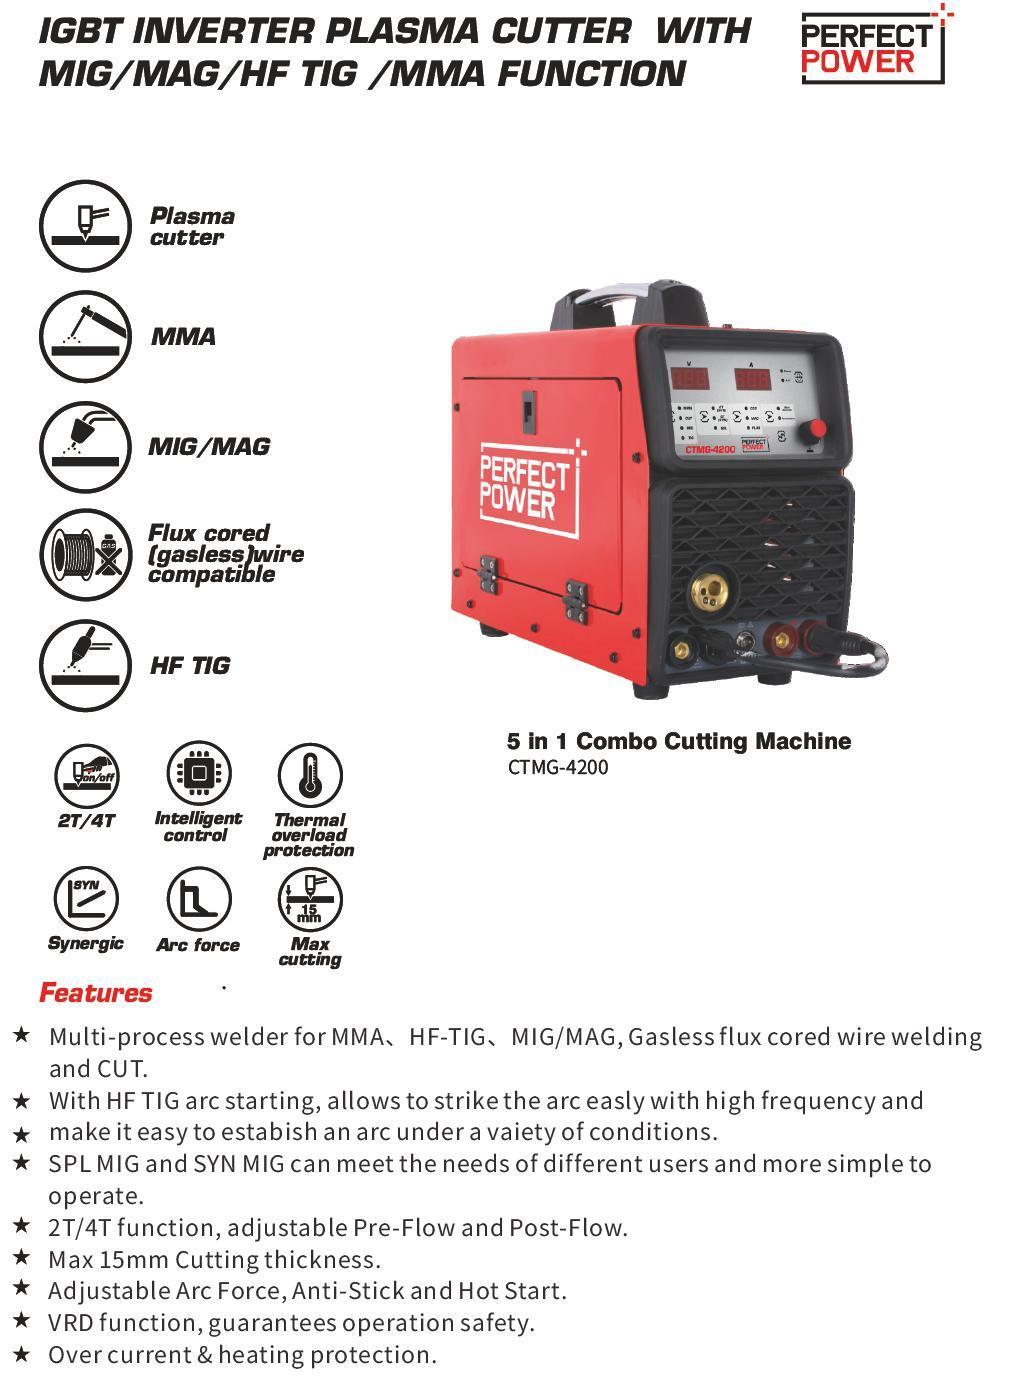 5 in 1 IGBT Inverter Plasma Cutter with MIG/Mag/Hf TIG/MMA Welding Function on Sale Ctmg-4200